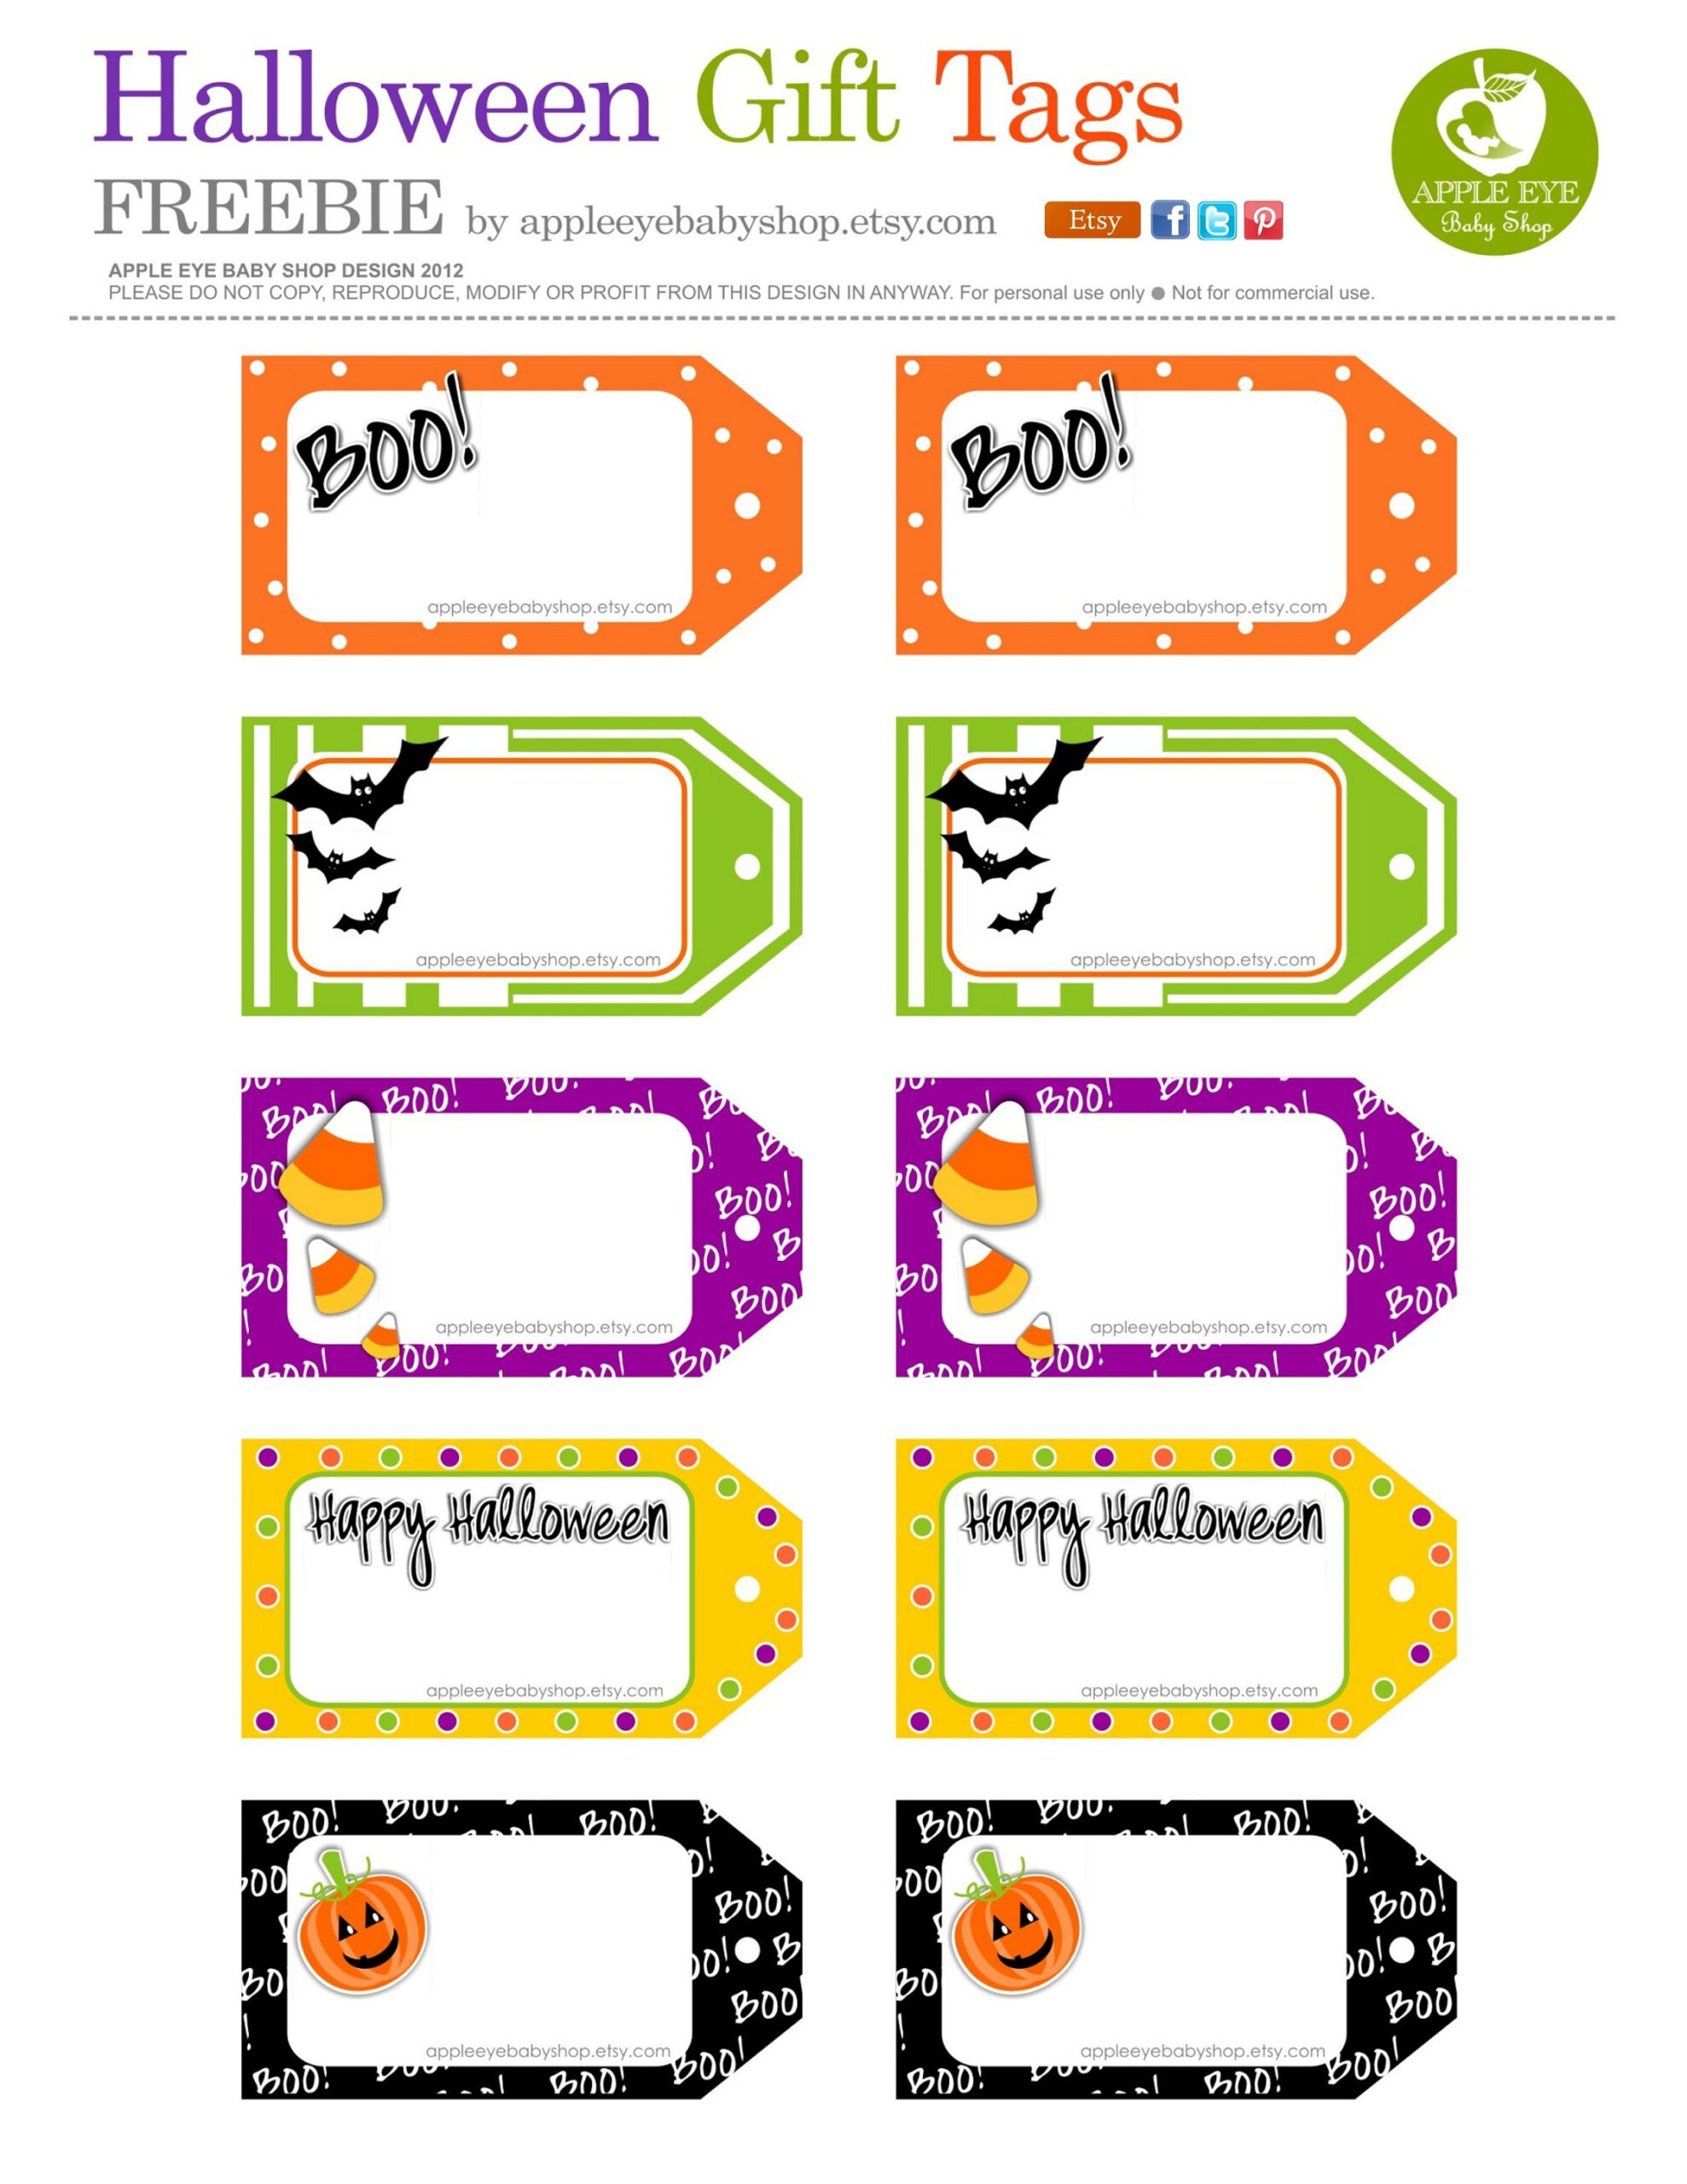 All Sizes FREE Printable Halloween Gift Tags By Apple Eye Baby Shop 